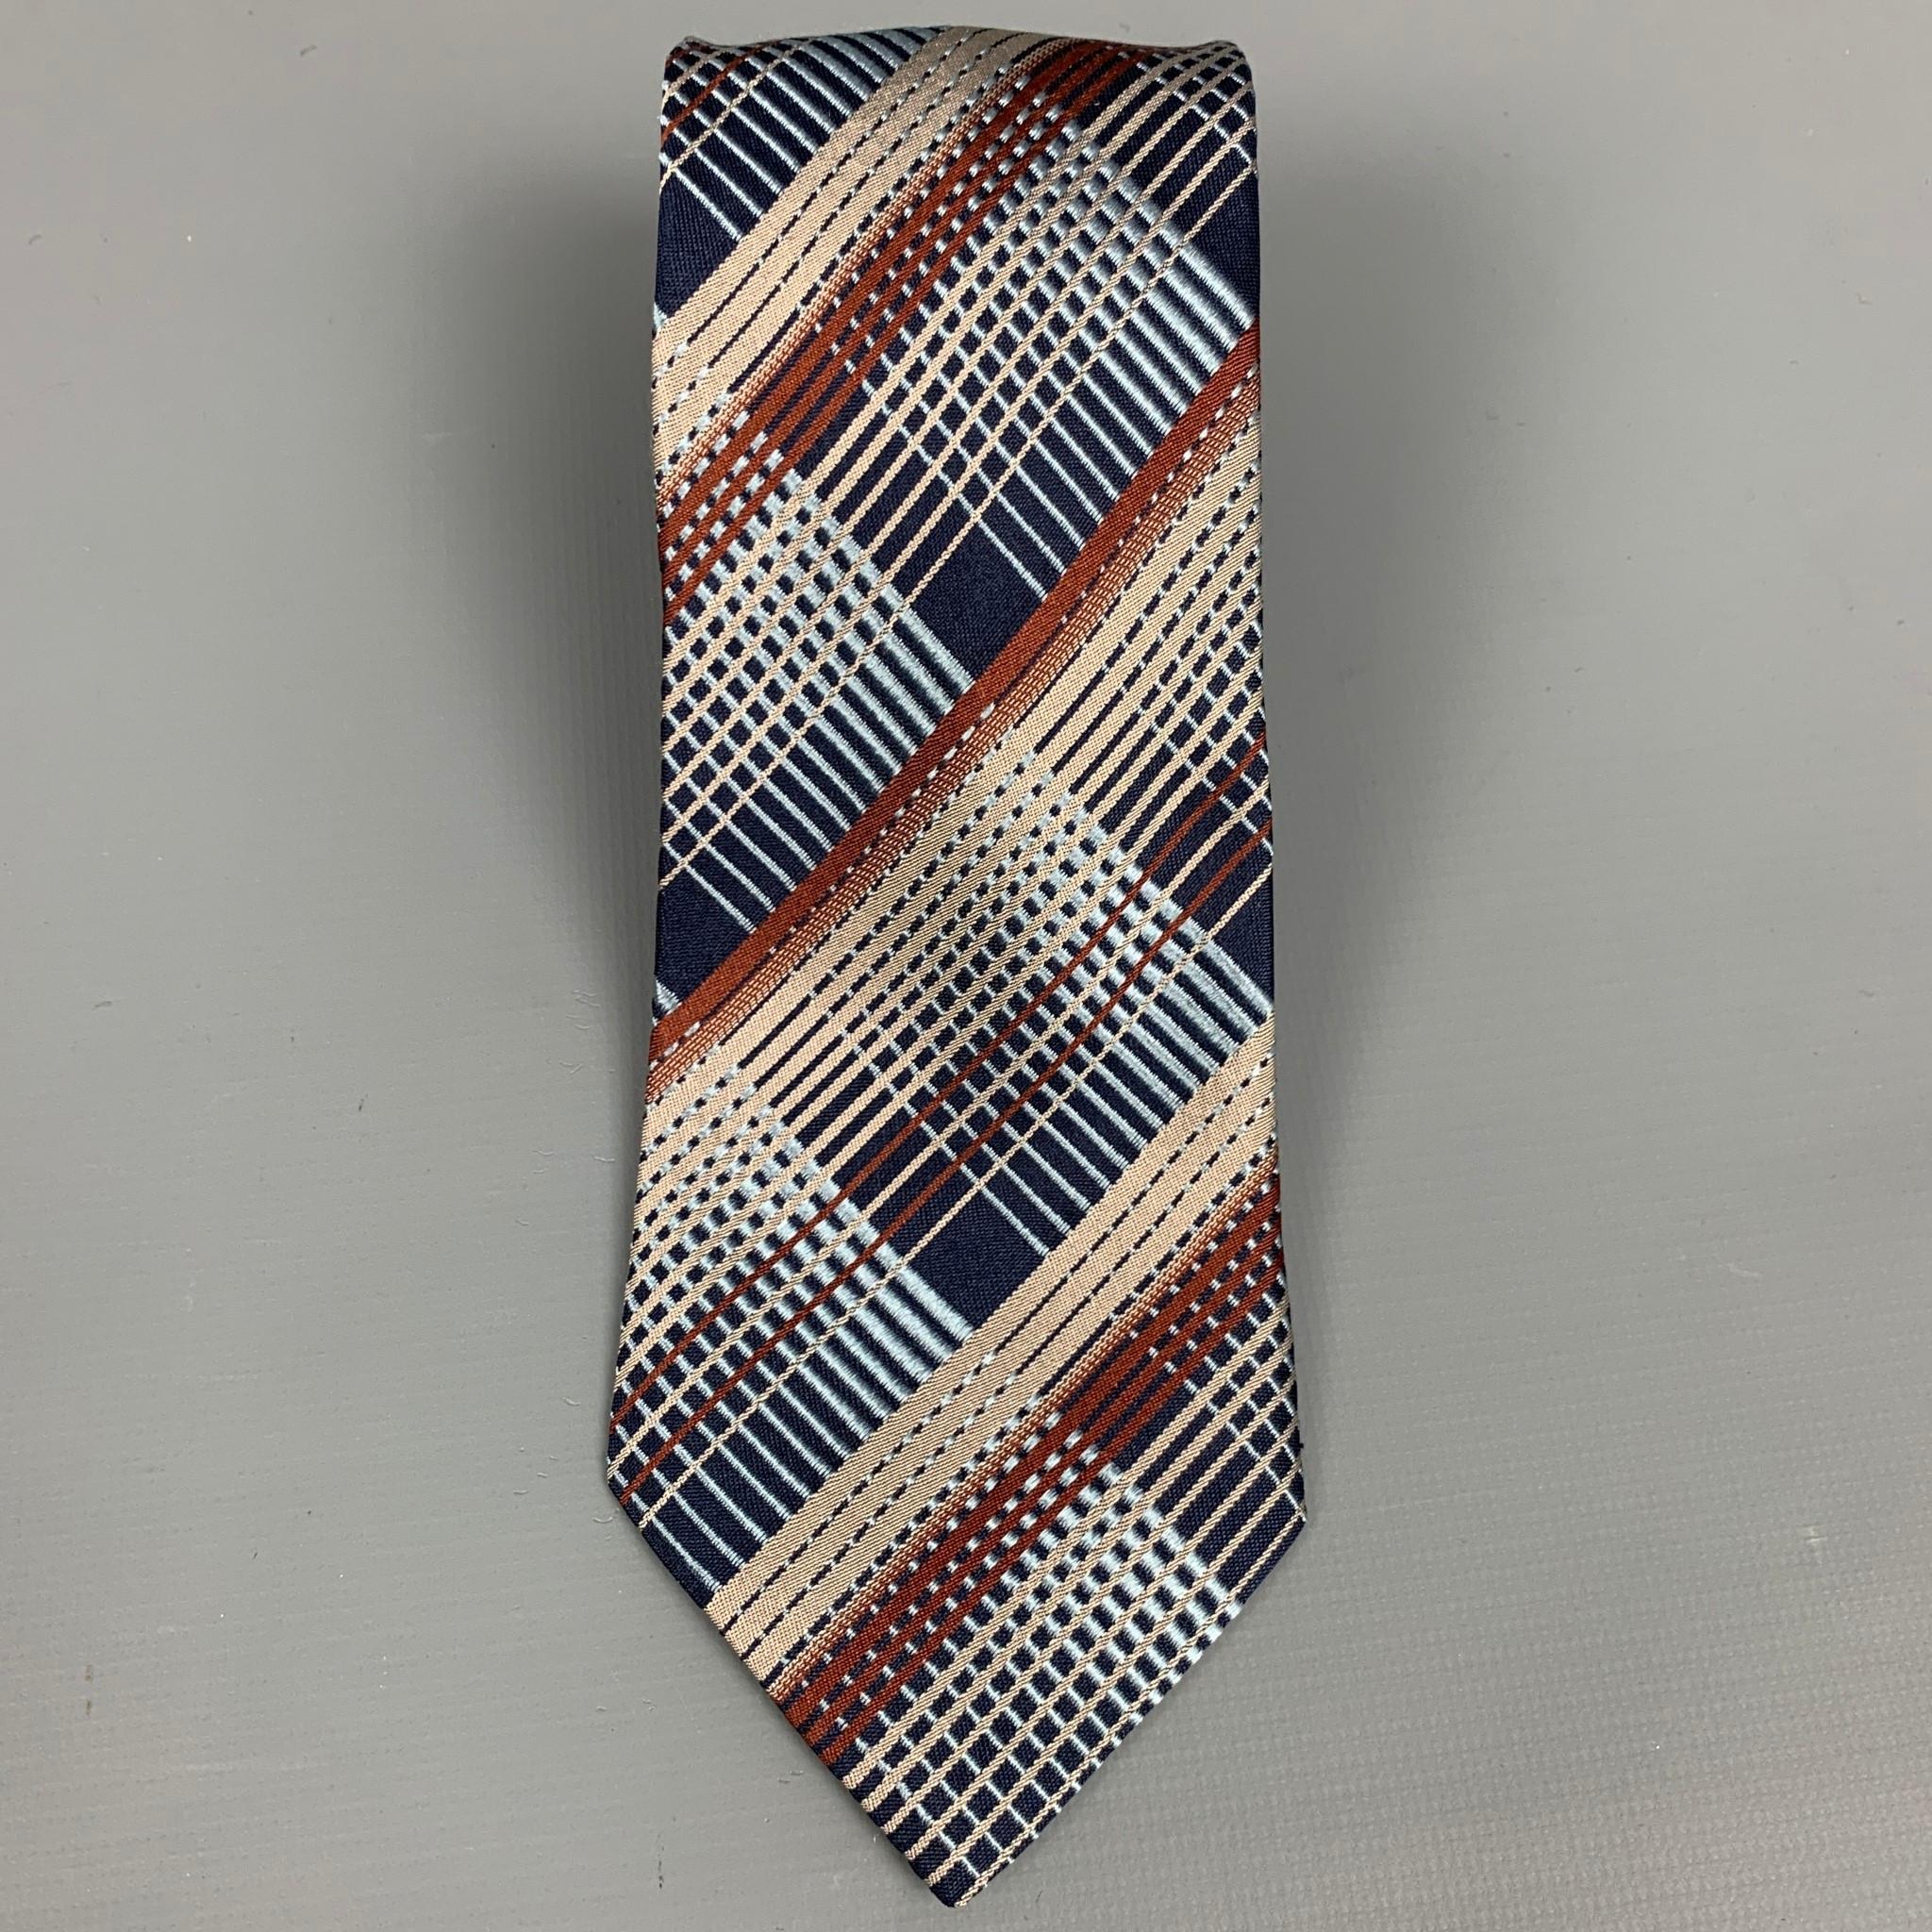 DRIES VAN NOTEN neck tie comes in a navy & brown plaid silk. Made in Italy.

Very Good Pre-Owned Condition.

Width: 3.5 in.  